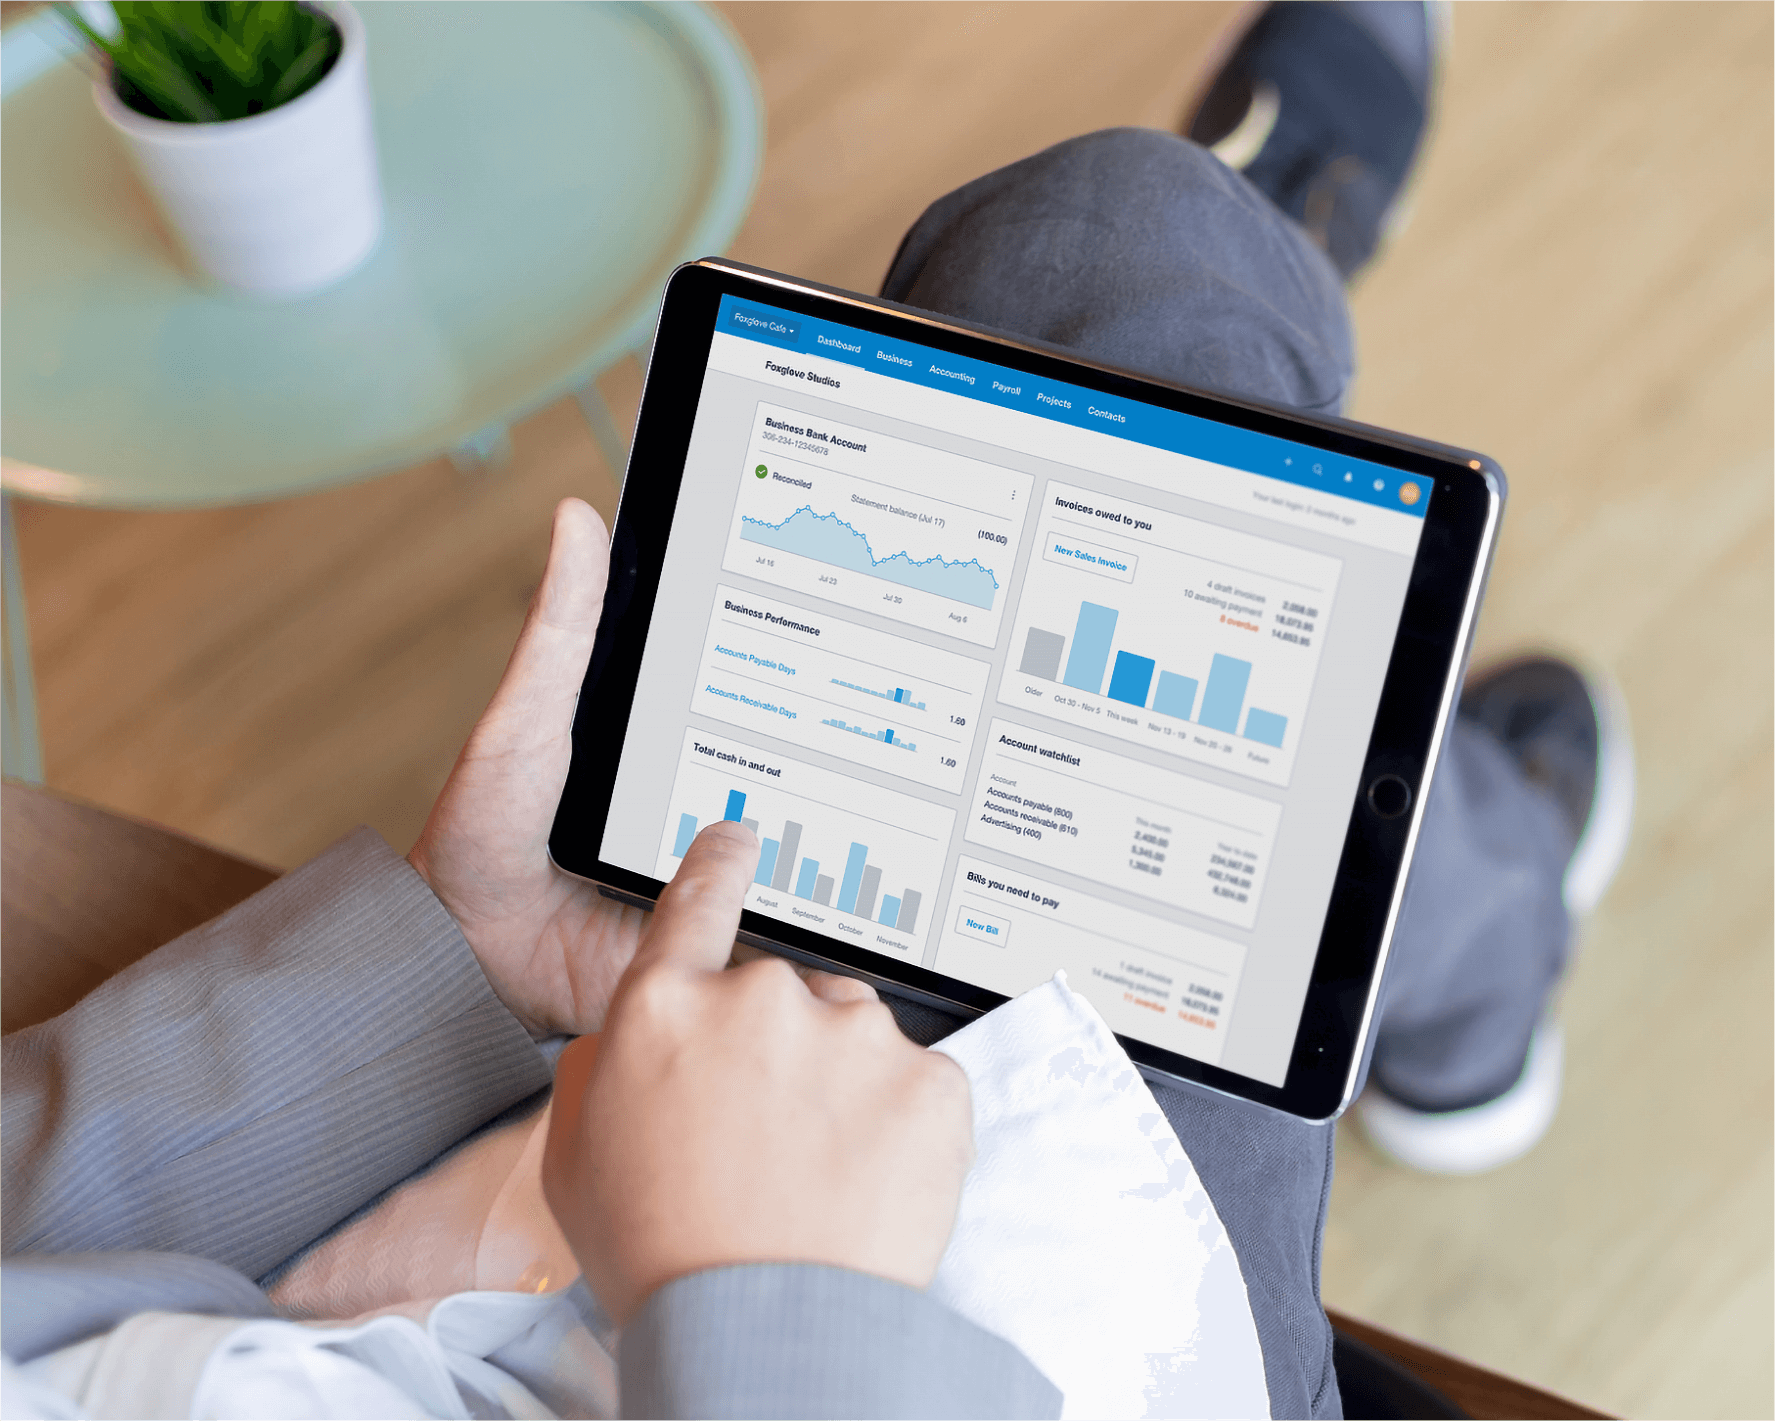 Checking business data in Xero on a tablet, preparing to connect with Moula to apply for small business finance. 